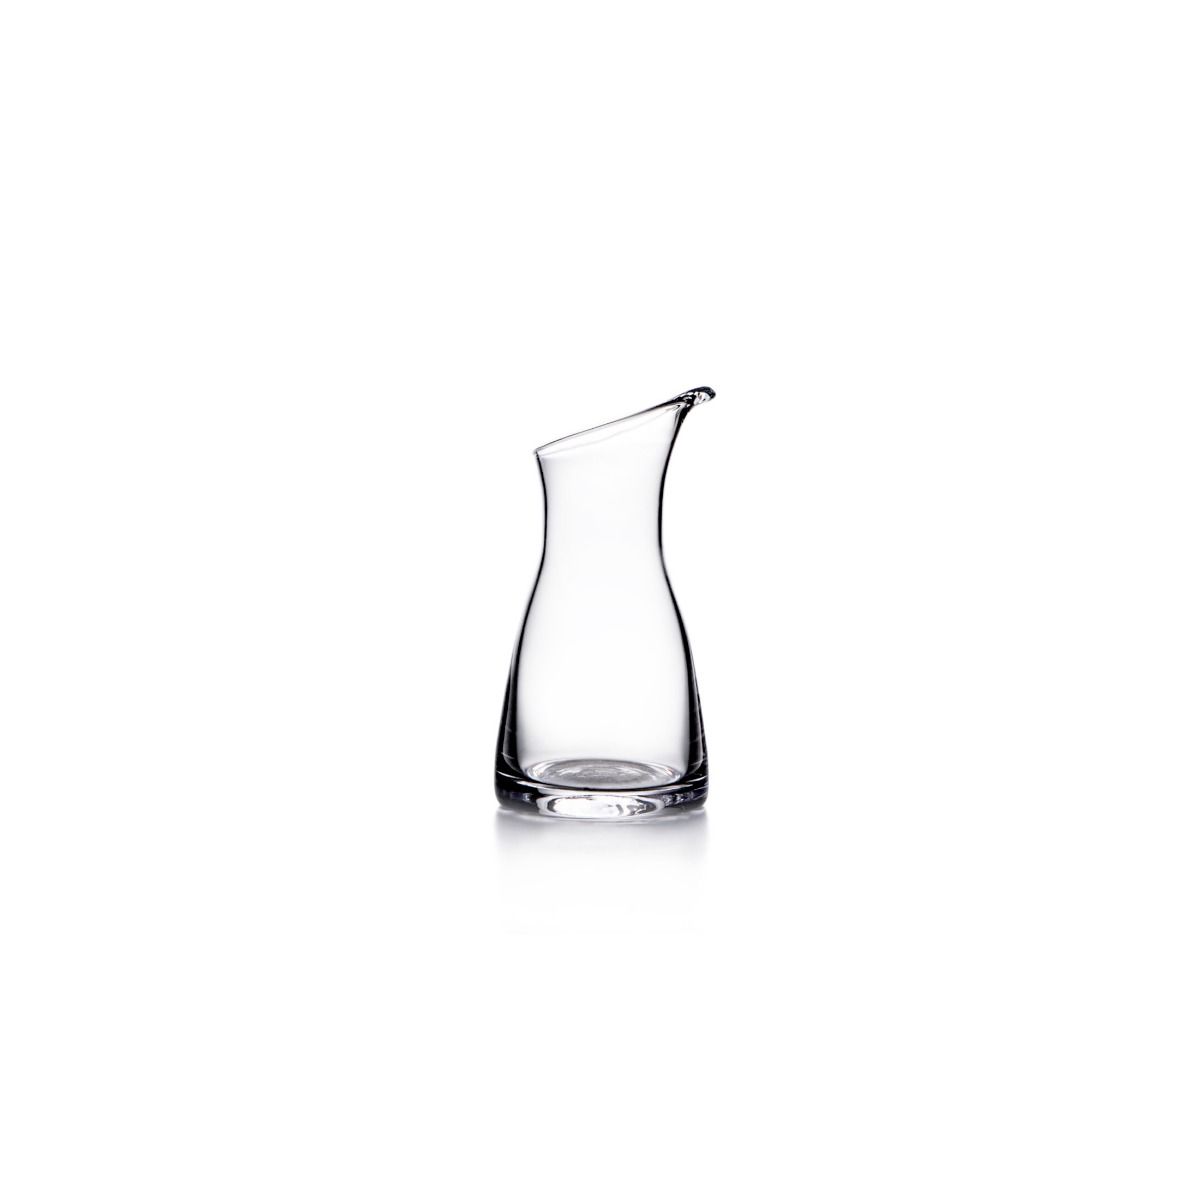 SIMON PEARCE CARAFE BARRE (Available in 3 Sizes)